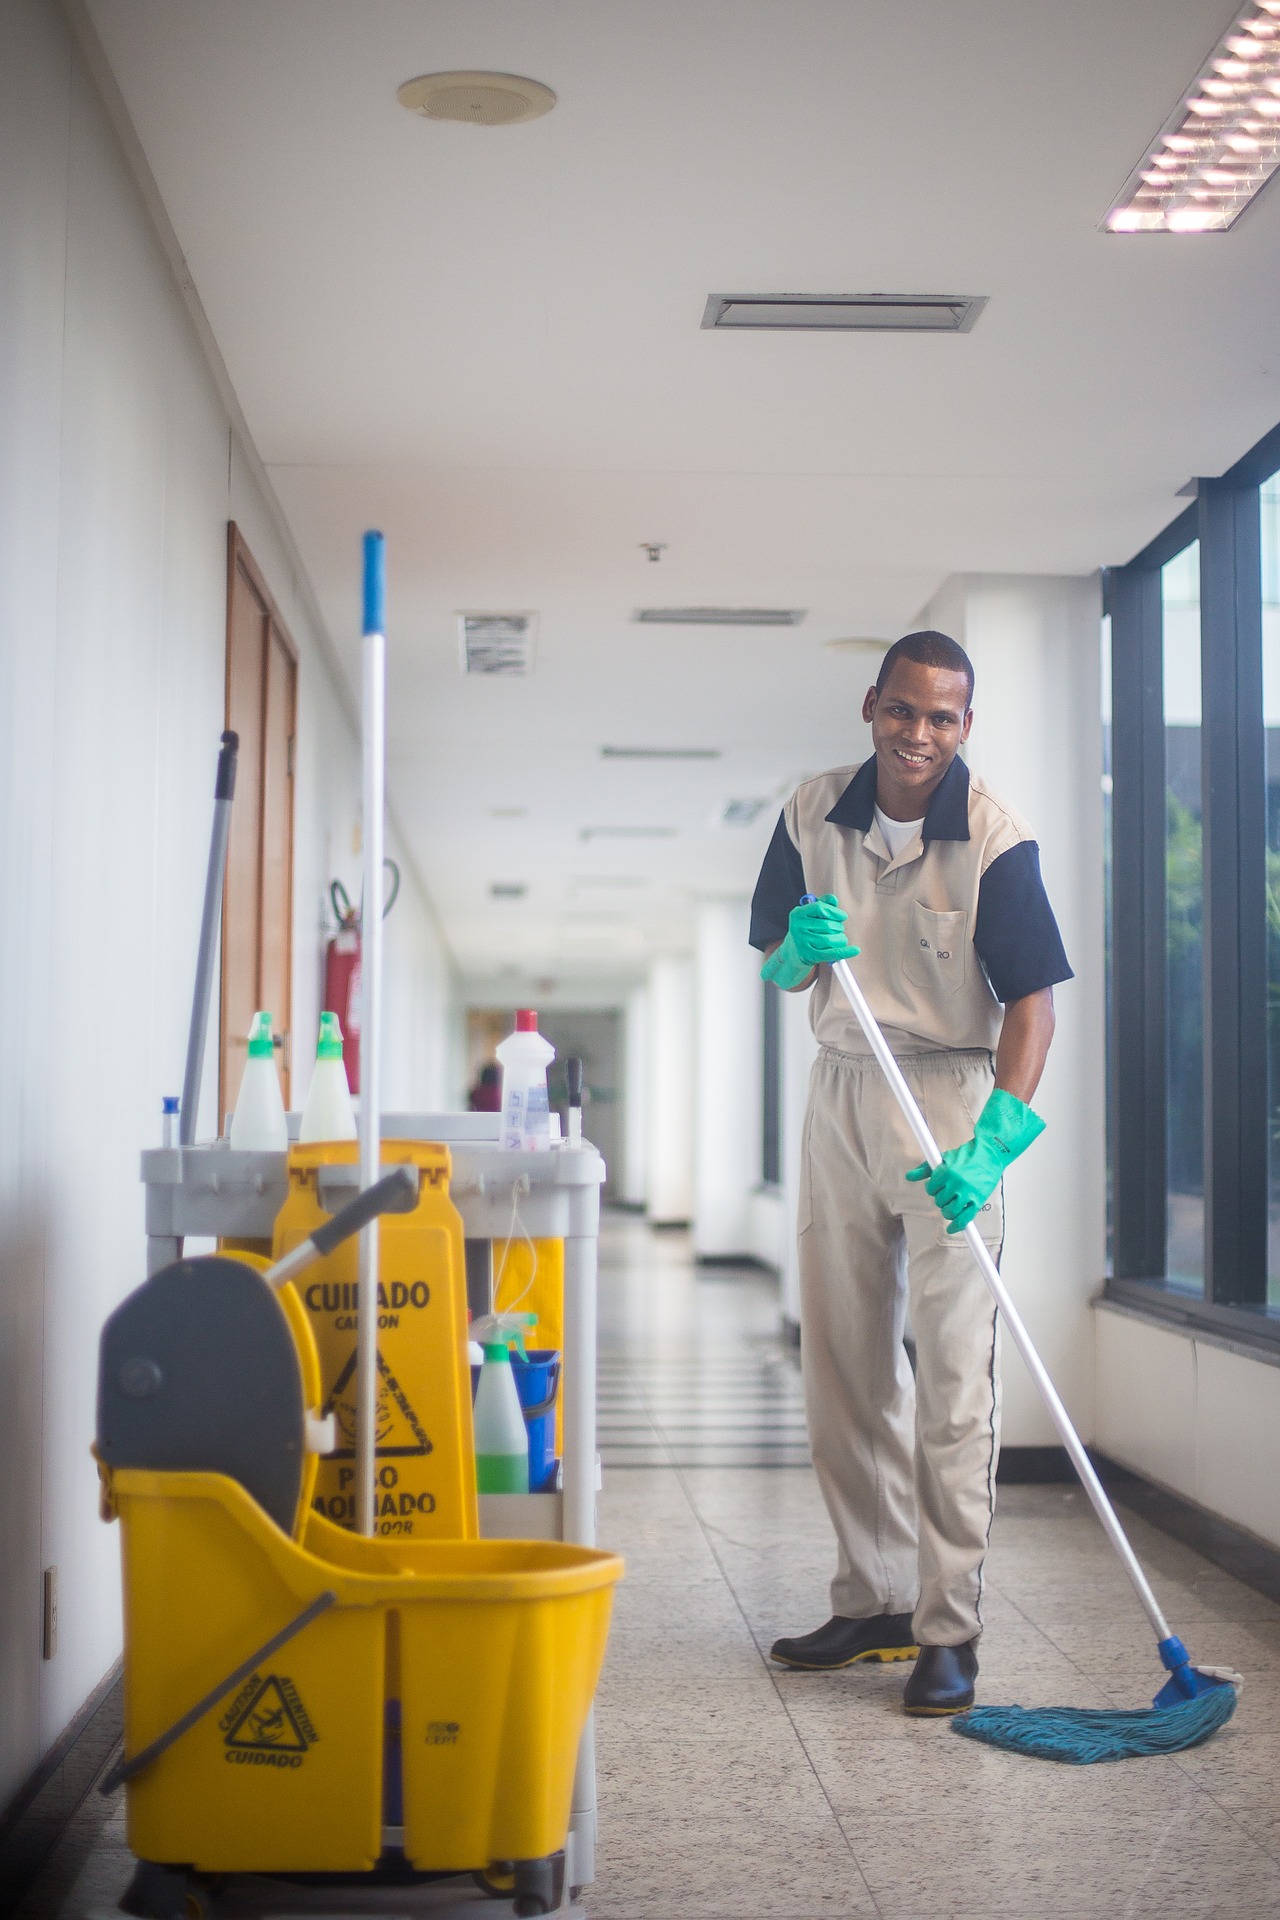 News: Cleaning training in the New Year